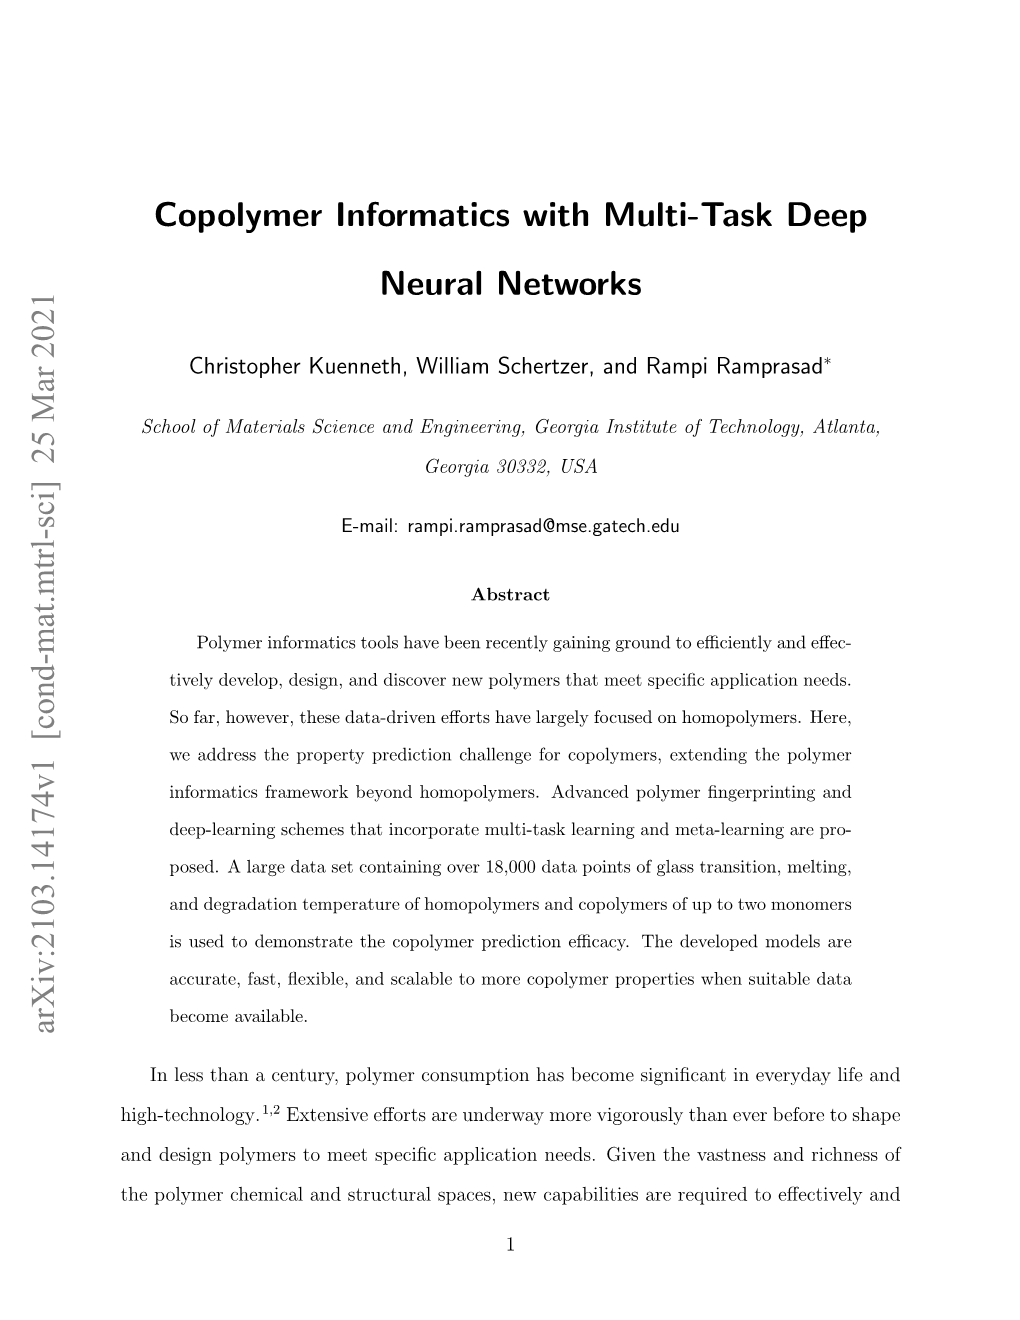 Copolymer Informatics with Multi-Task Deep Neural Networks